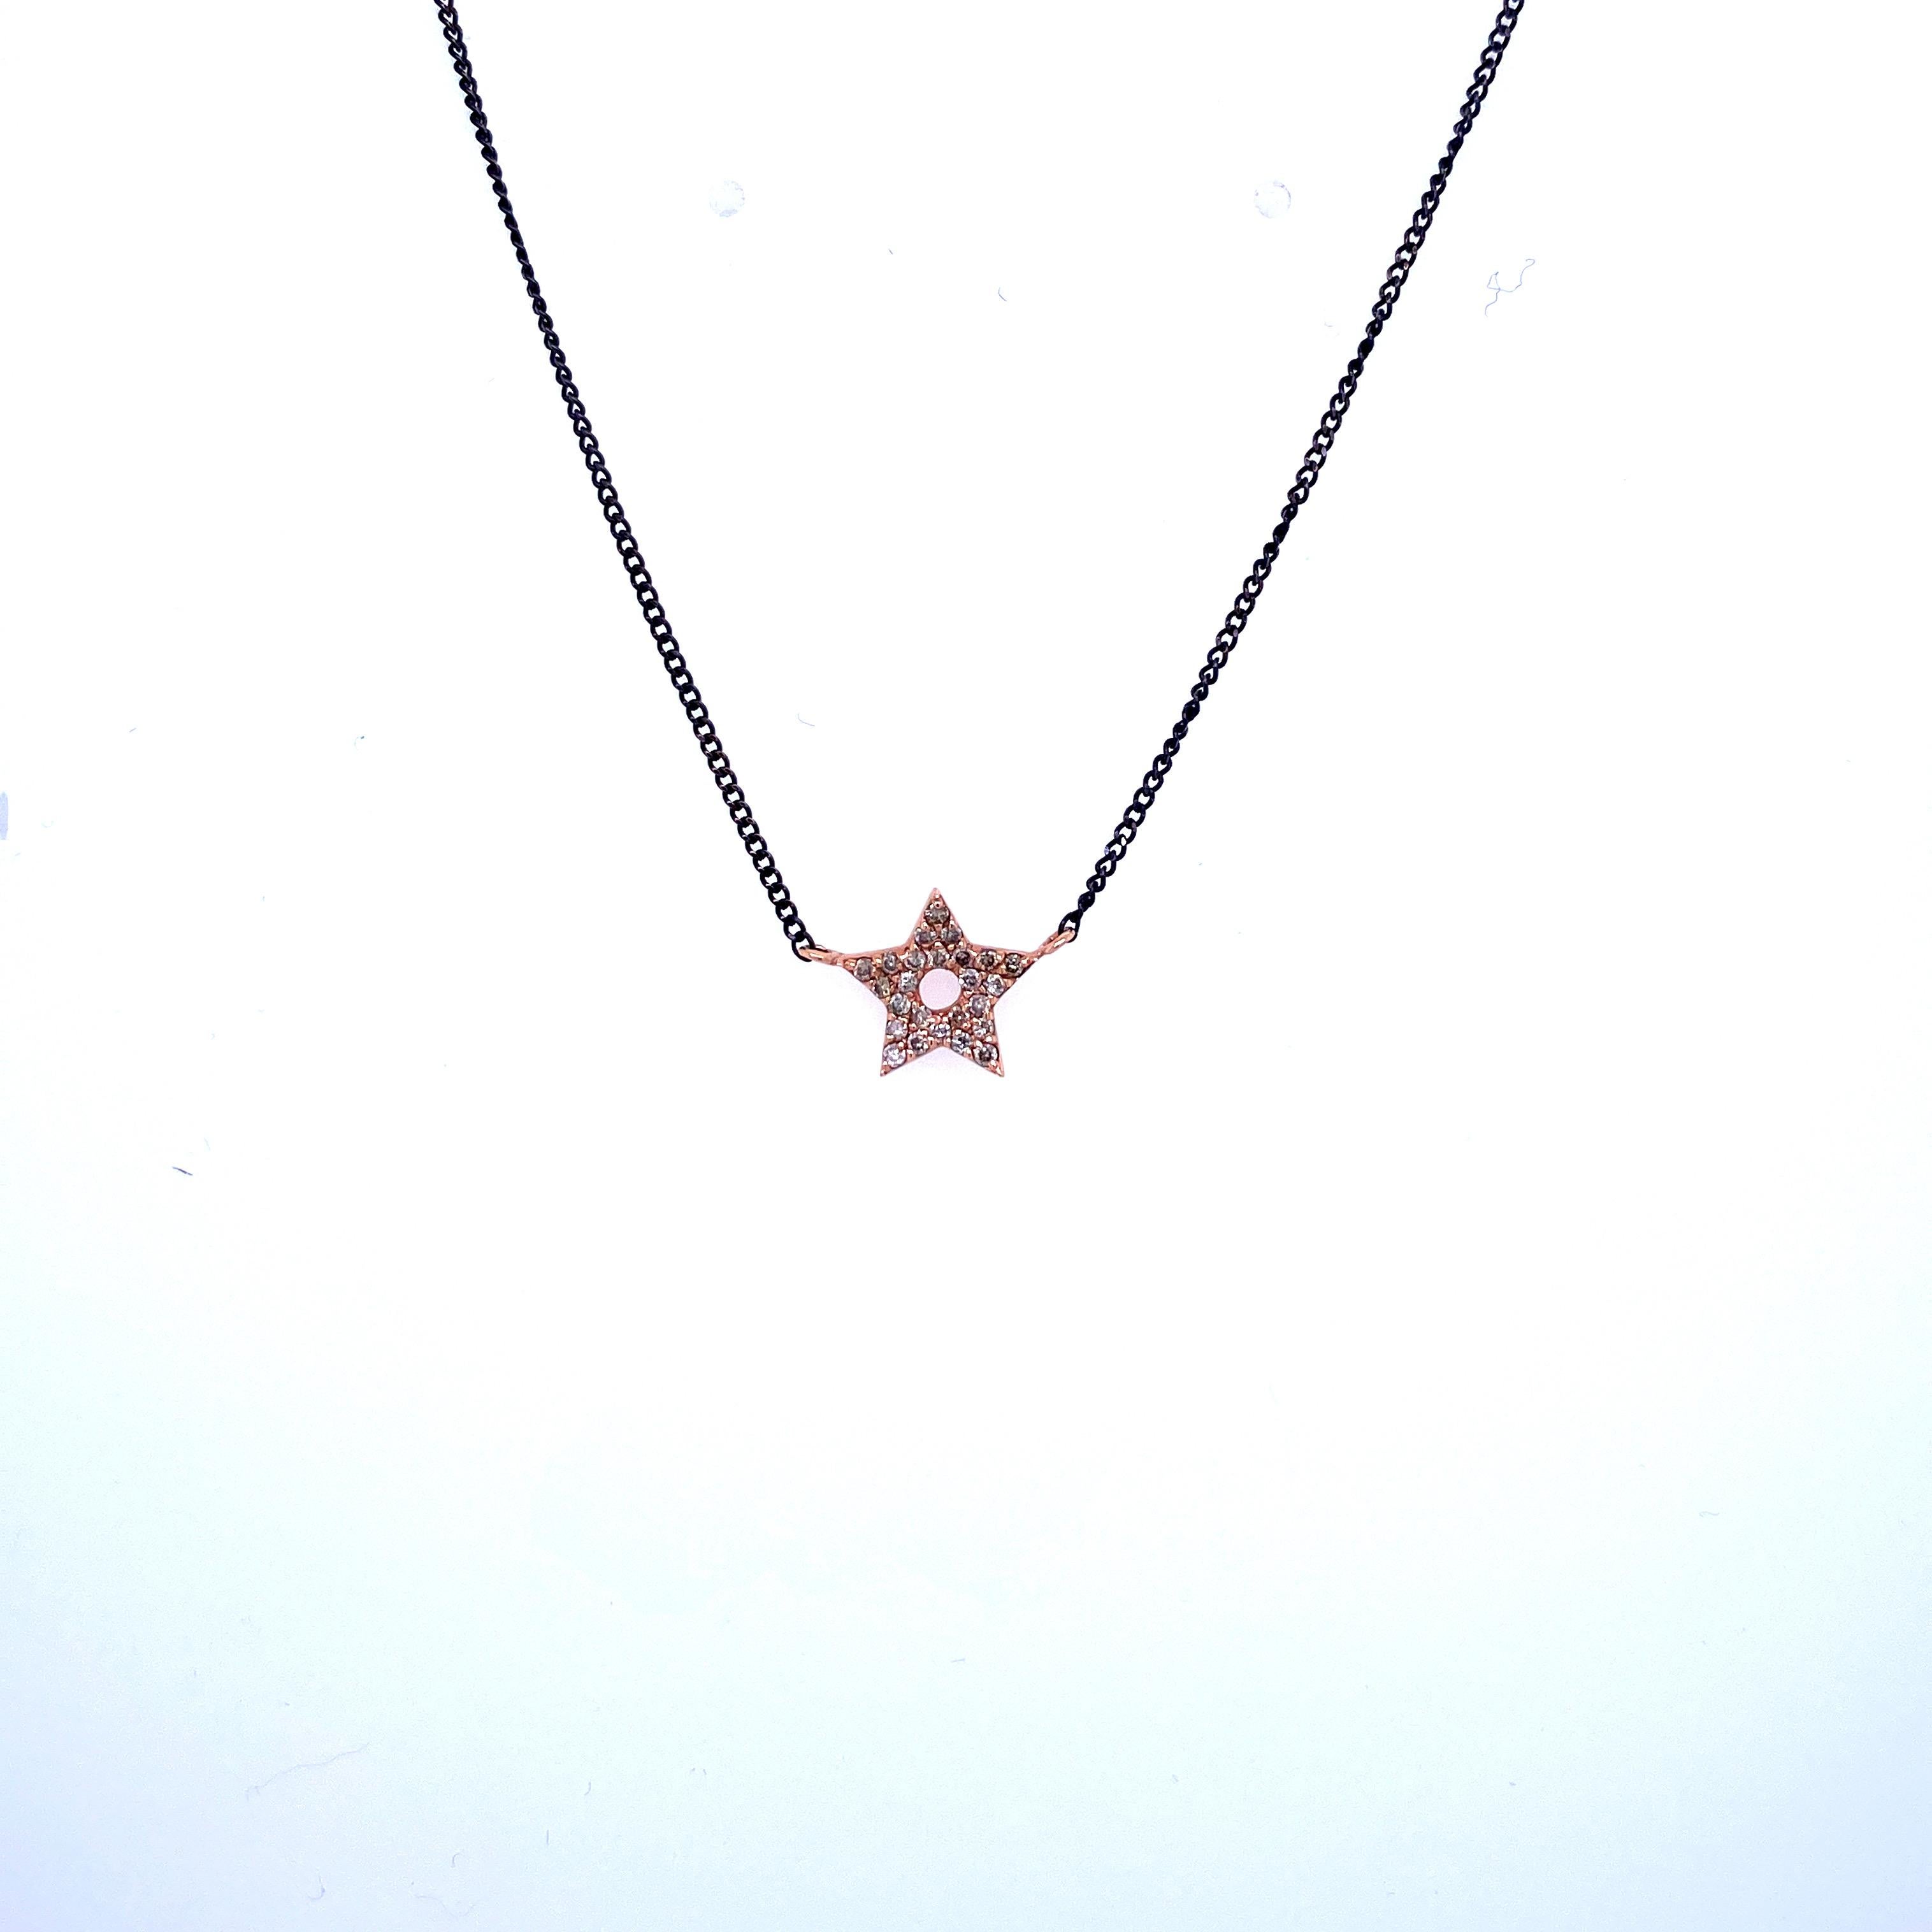 Beautiful design necklace, it features a Star shape pendant made of 14k Rose gold and set with 0.10 carats of colorless diamonds (G Color IF clarity). The Necklace is made of 14k black gold.

Wearable in three lengths, choker included, thanks to the